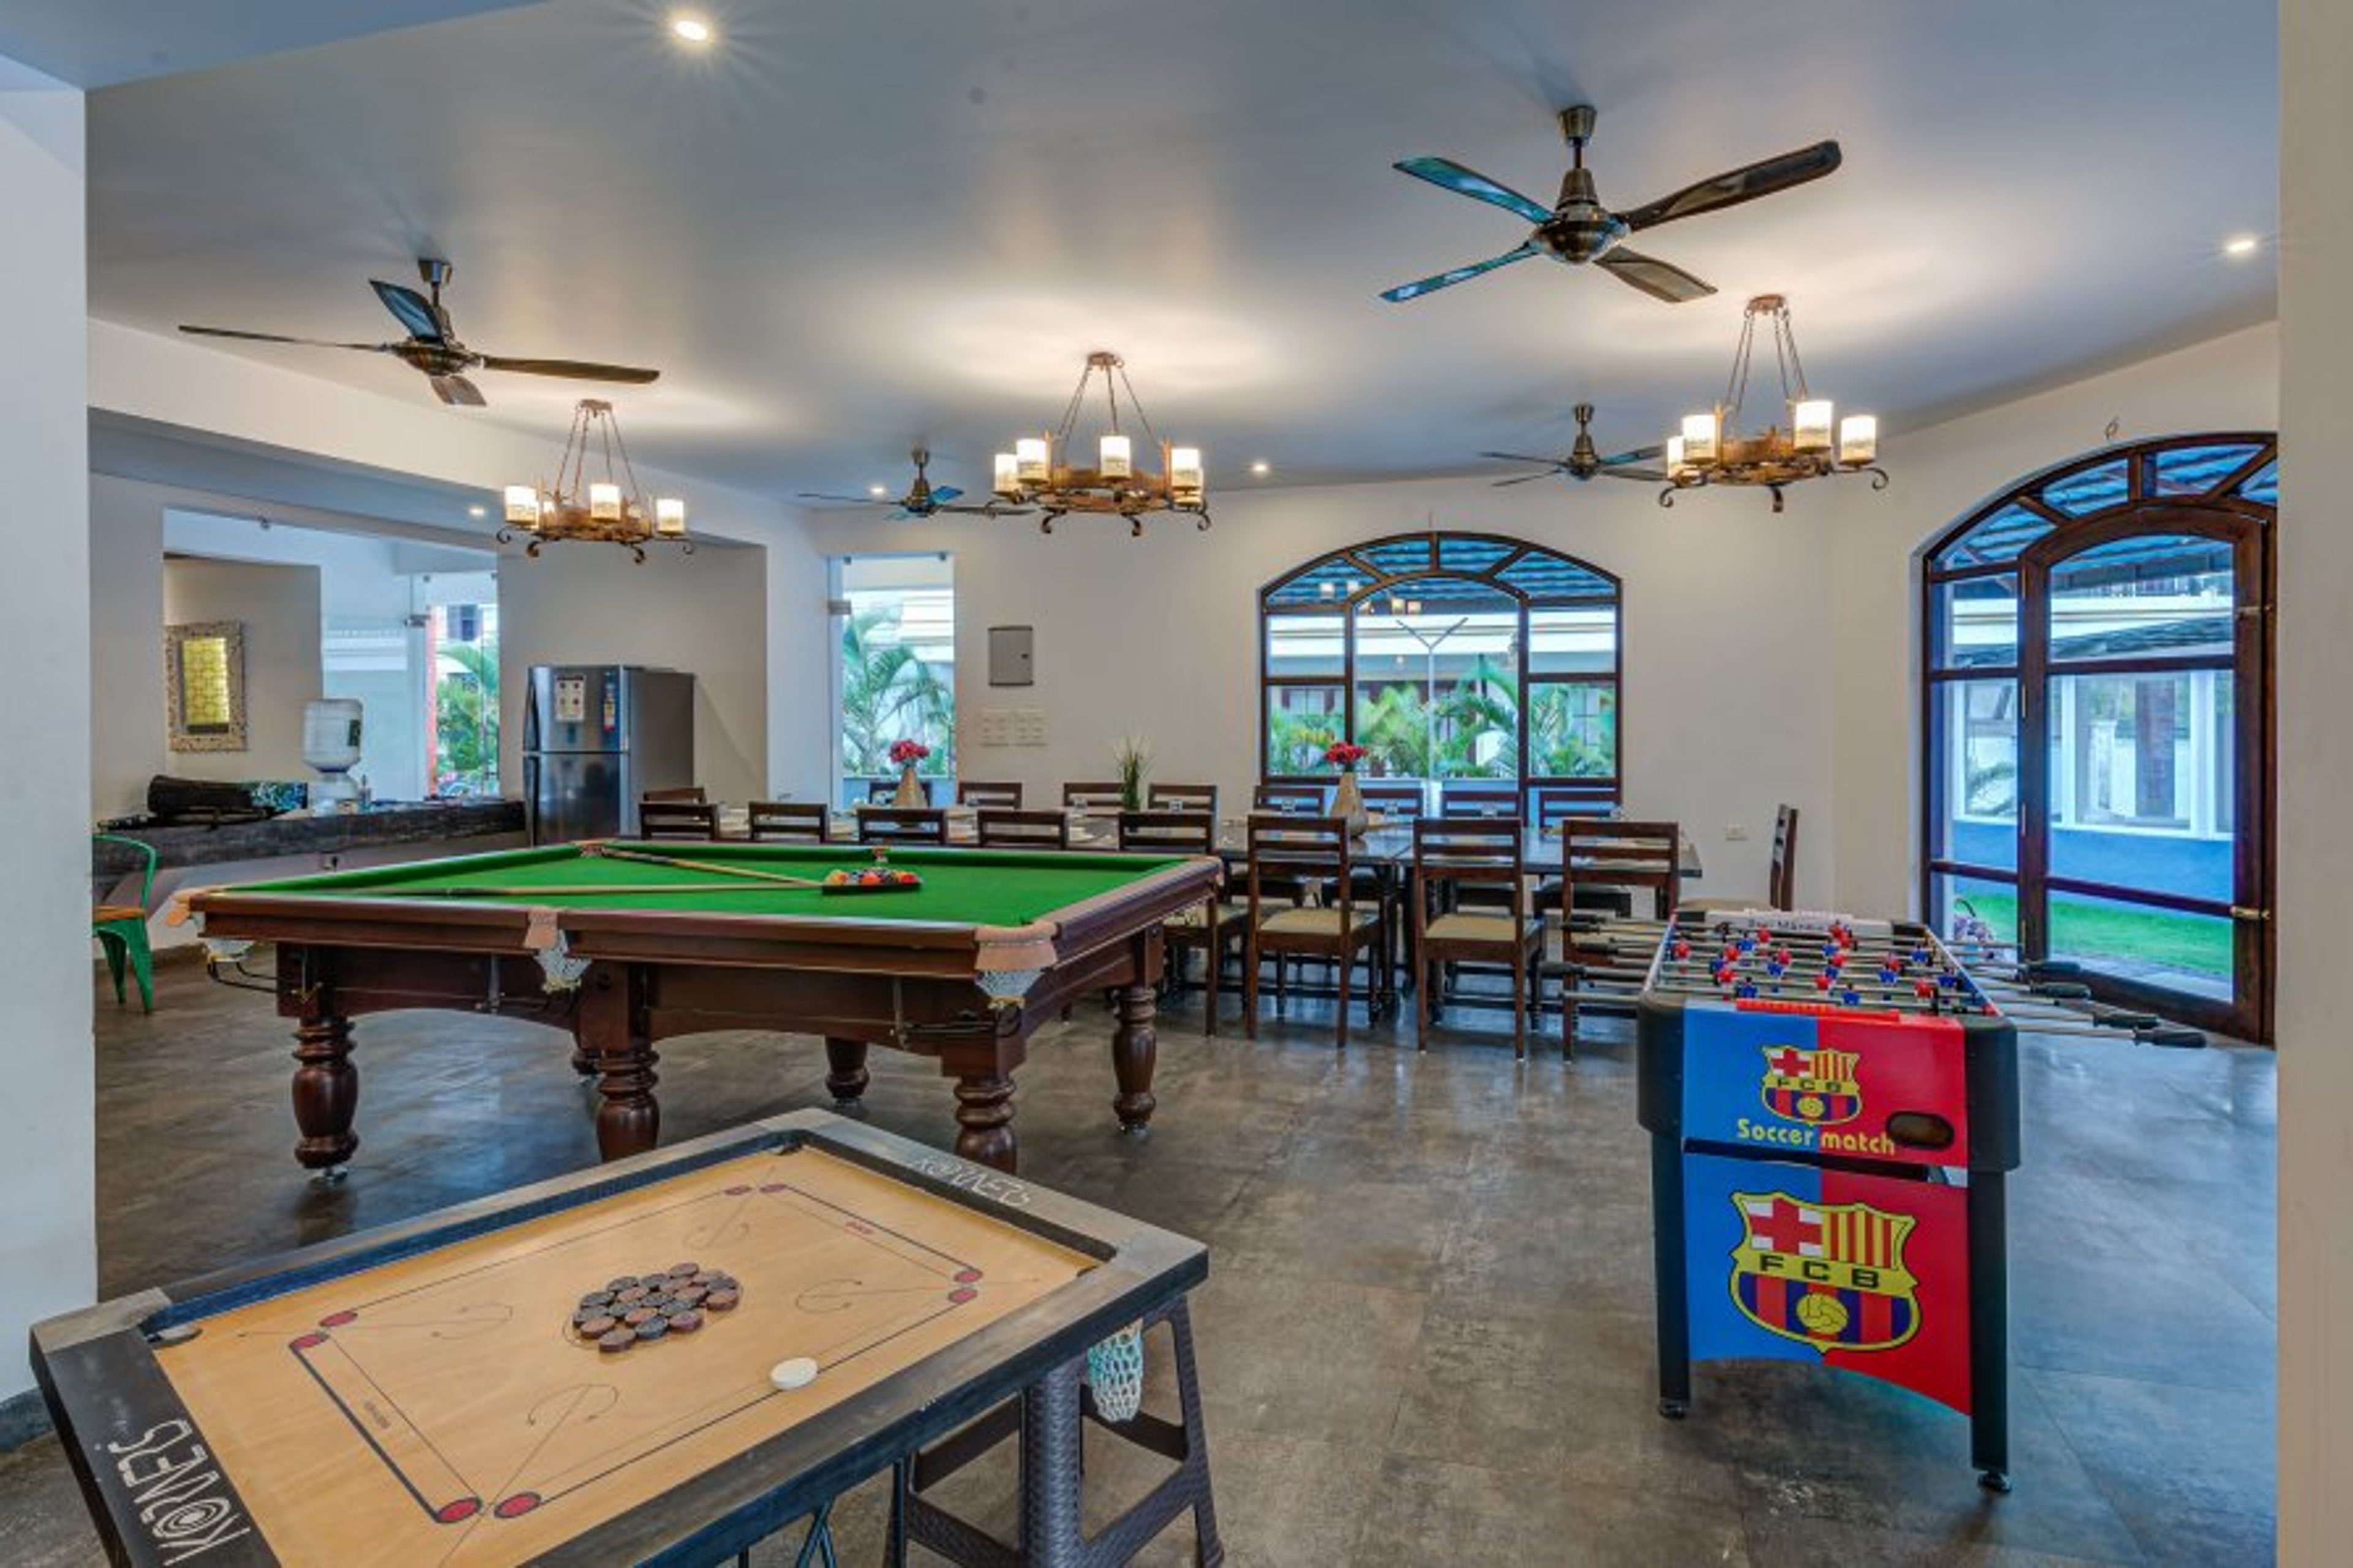 Games - pool table, carrom and foosball